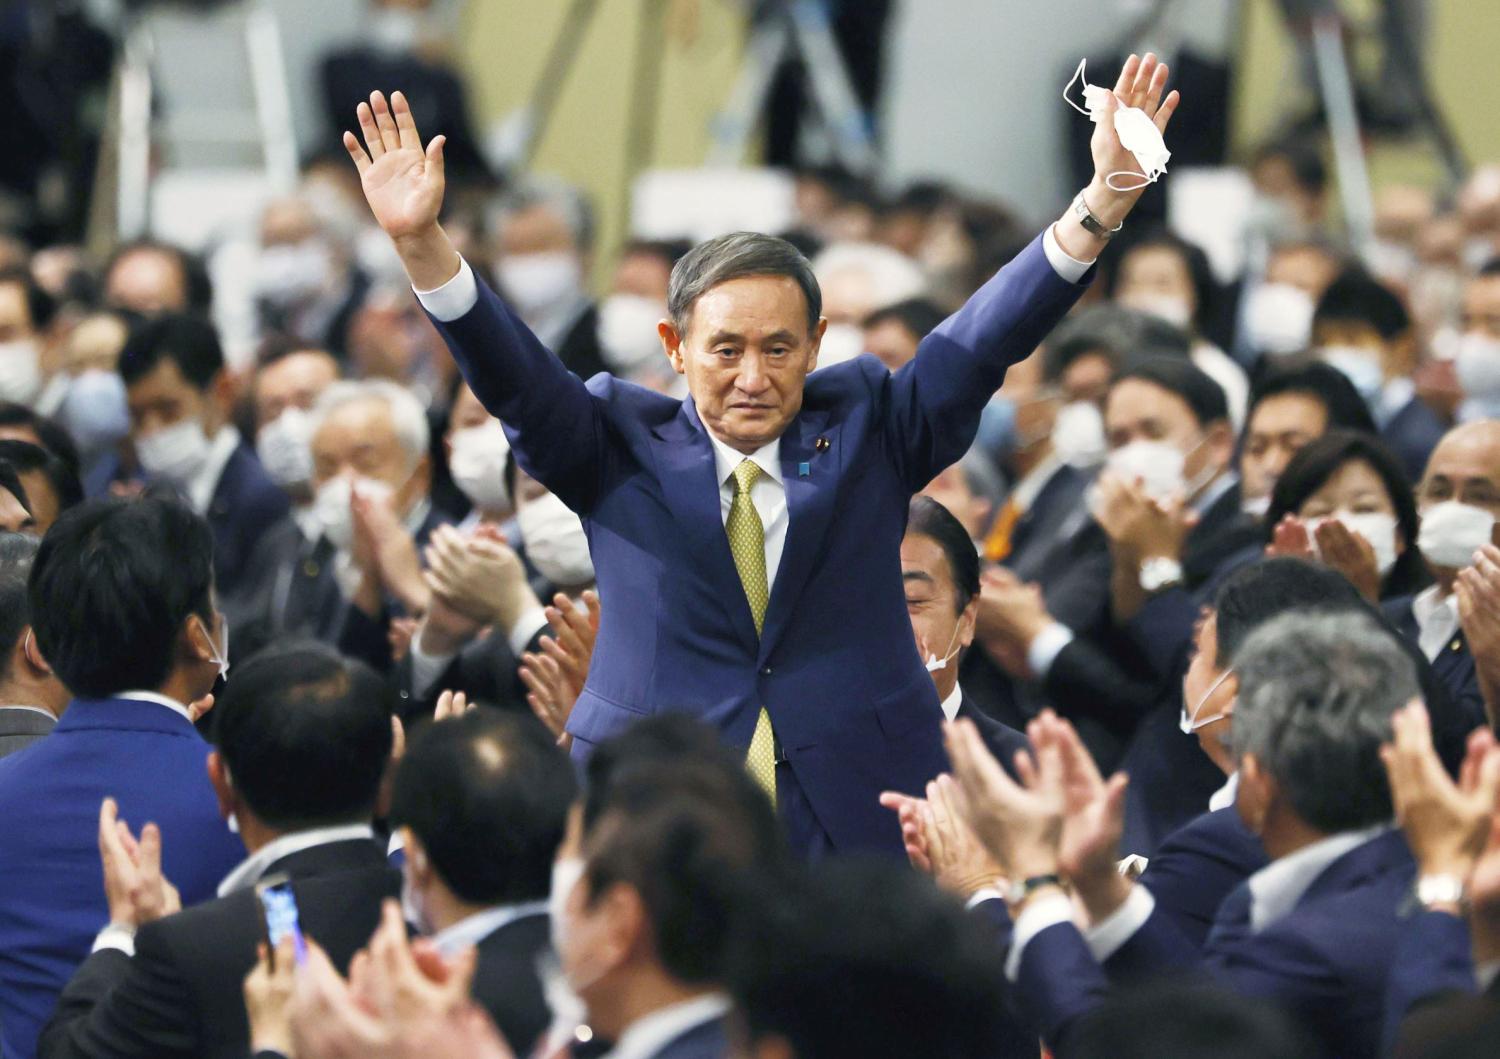 Japanese Chief Cabinet Secretary Suga gestures as he is elected as new head of the ruling party at the Liberal Democratic Party's (LDP) leadership election in Tokyo | Credit: Kyodo